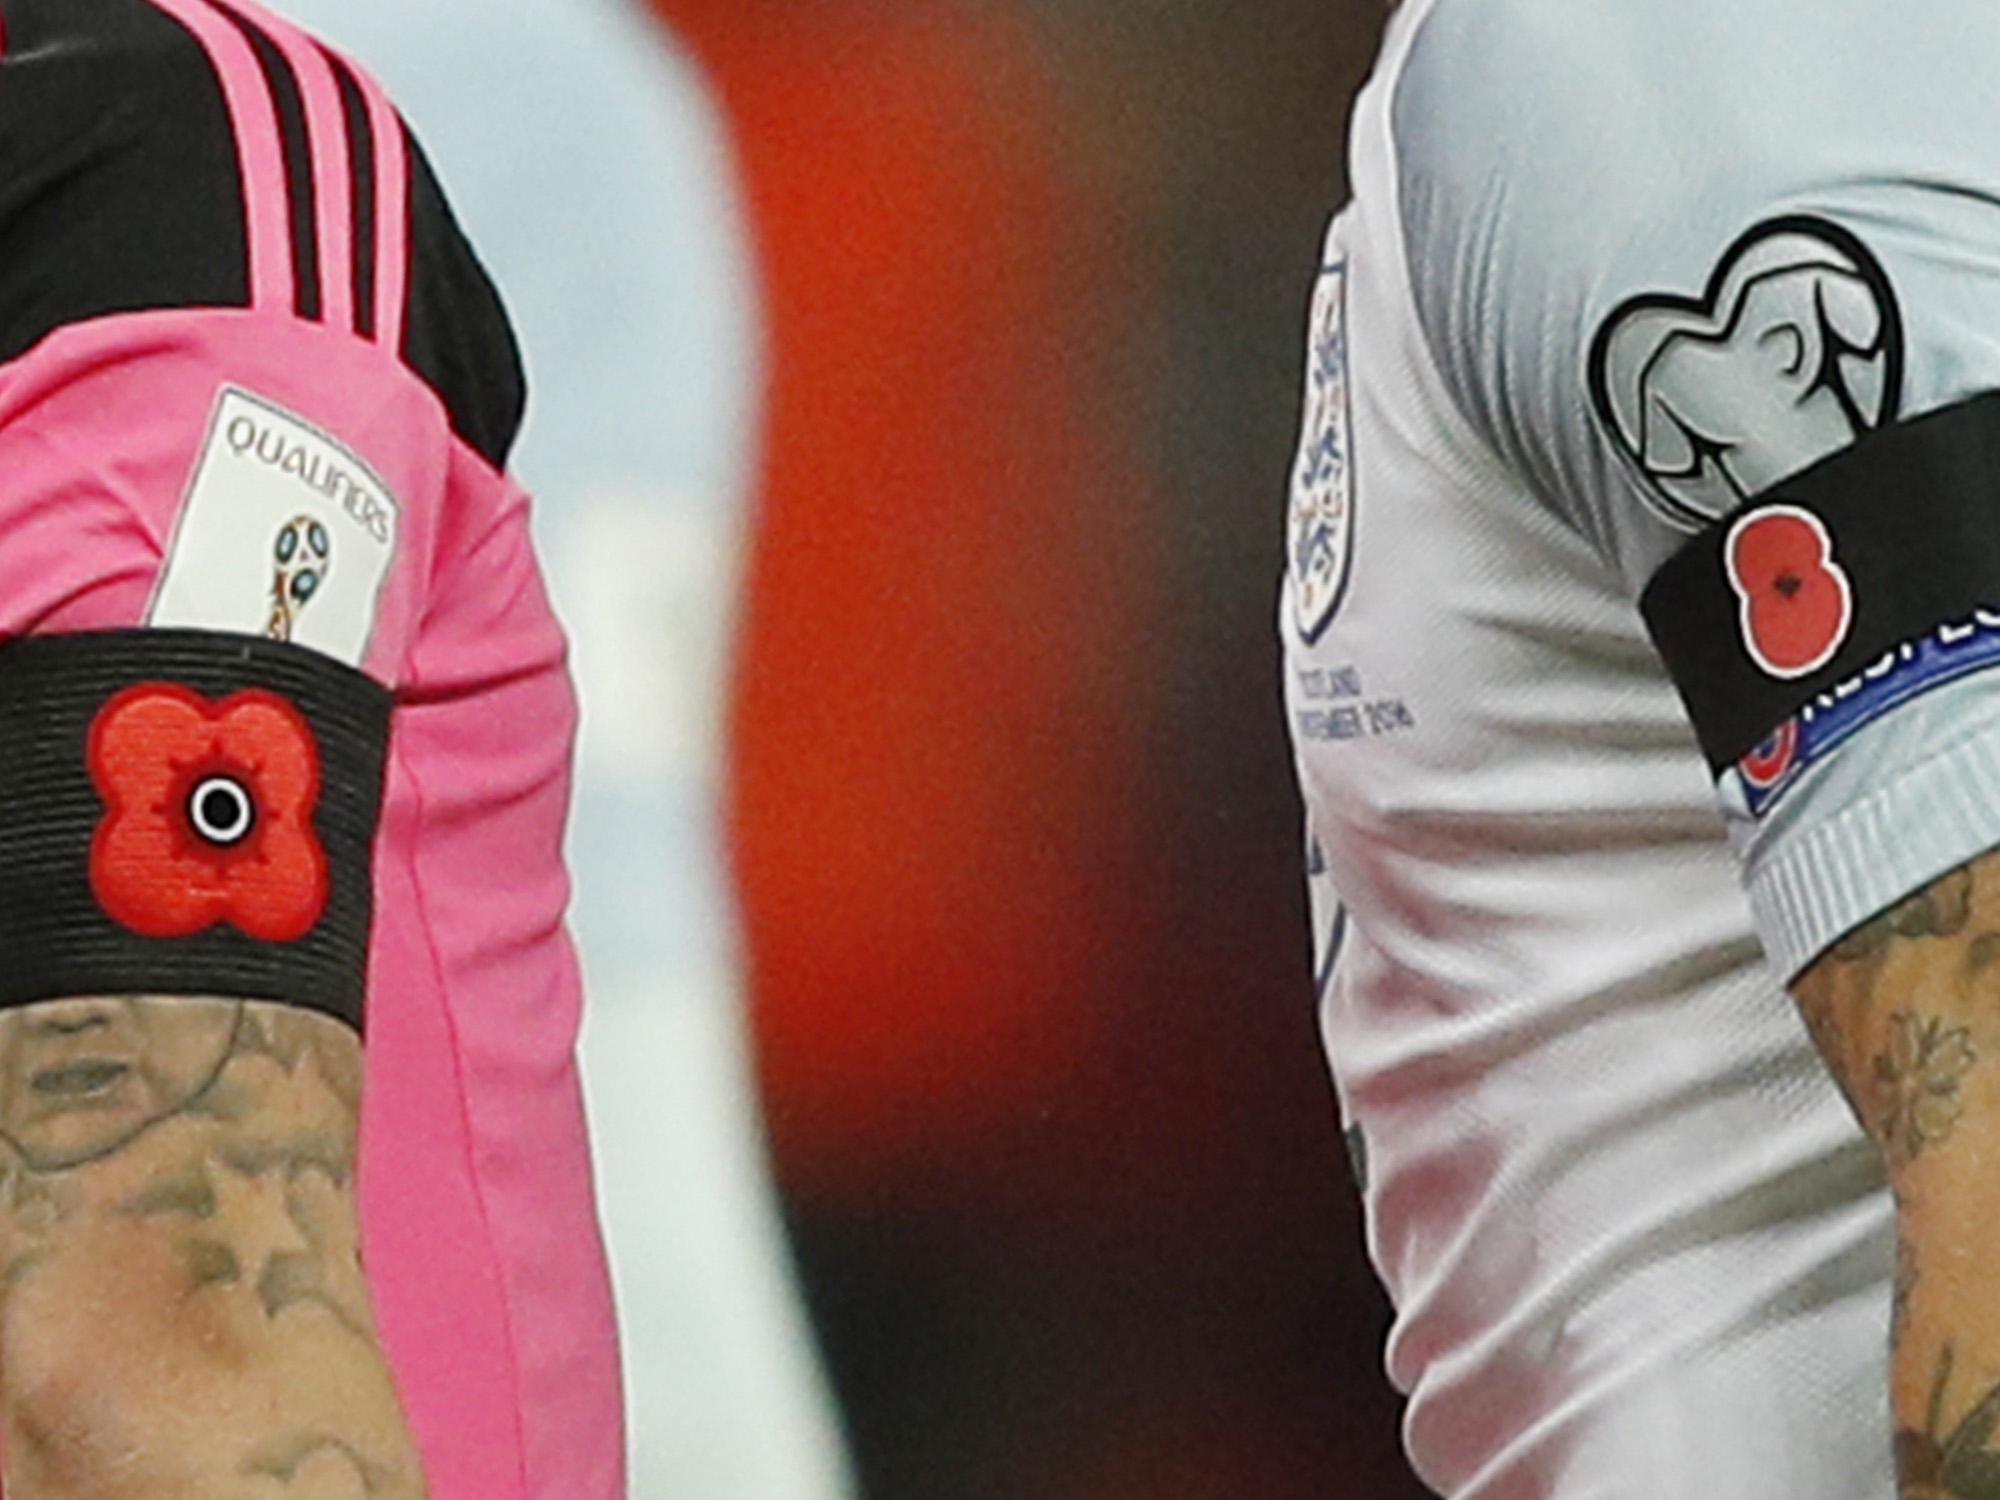 Scotland and England players wore commemorative poppies on black armbands last November